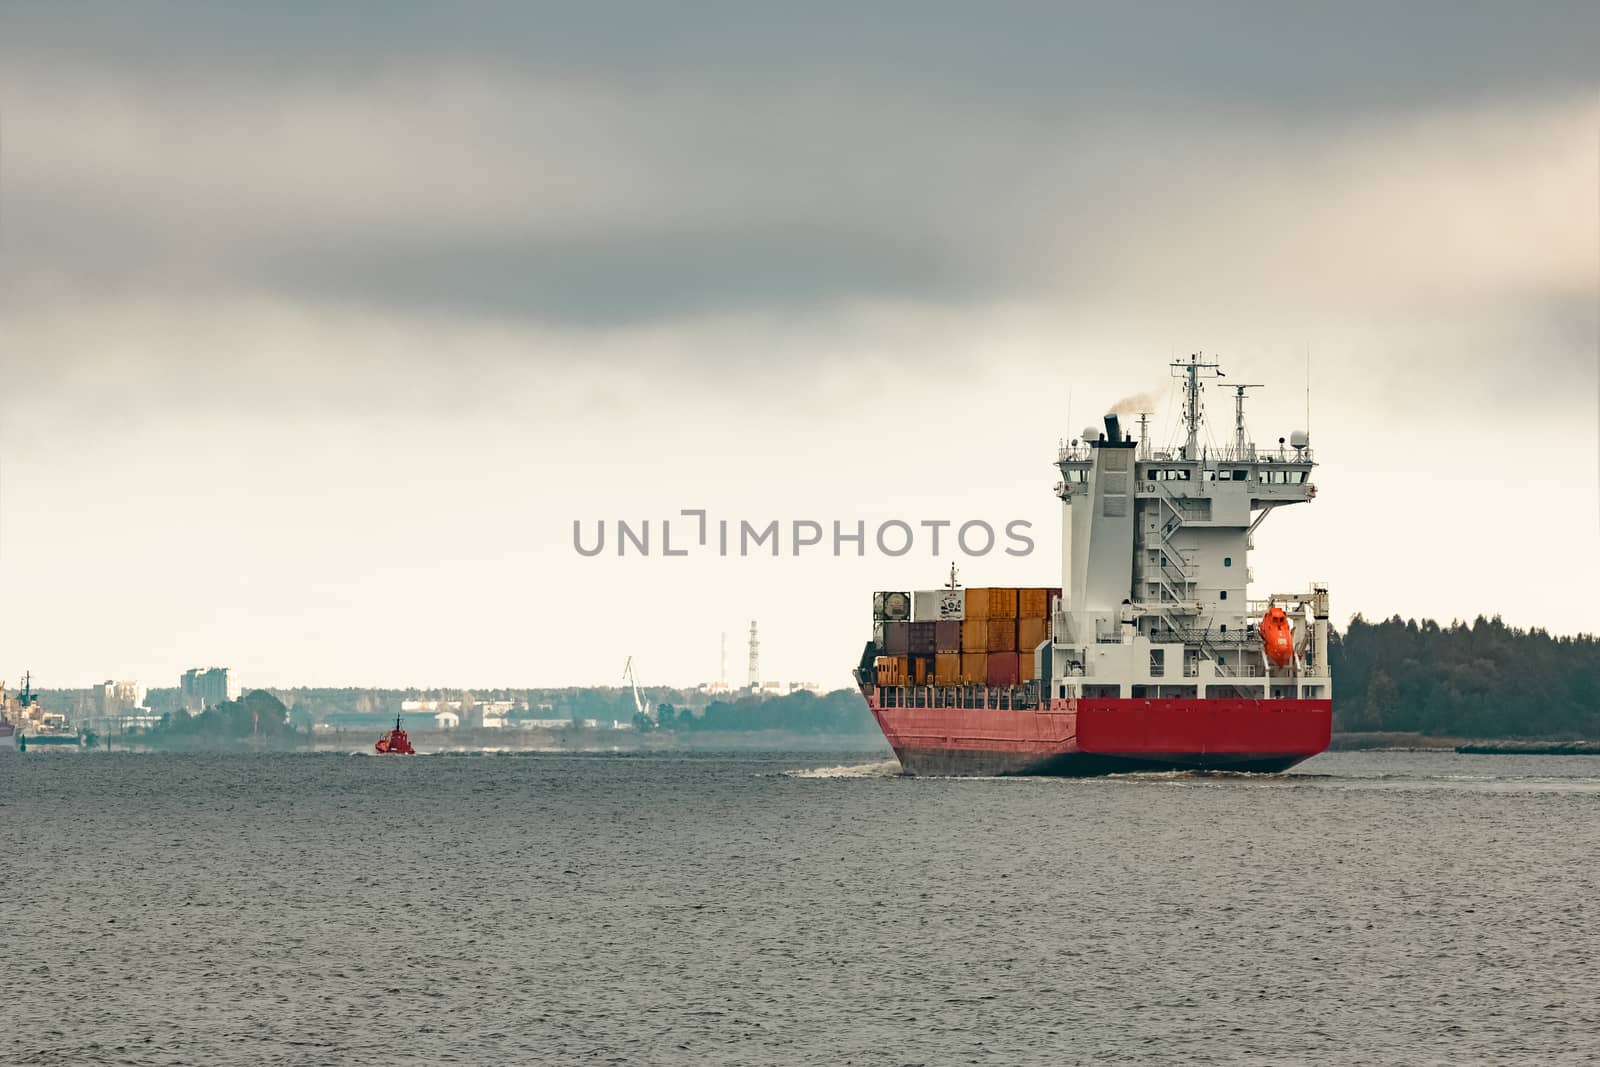 Red cargo container ship entering the port of Riga in cloudy day